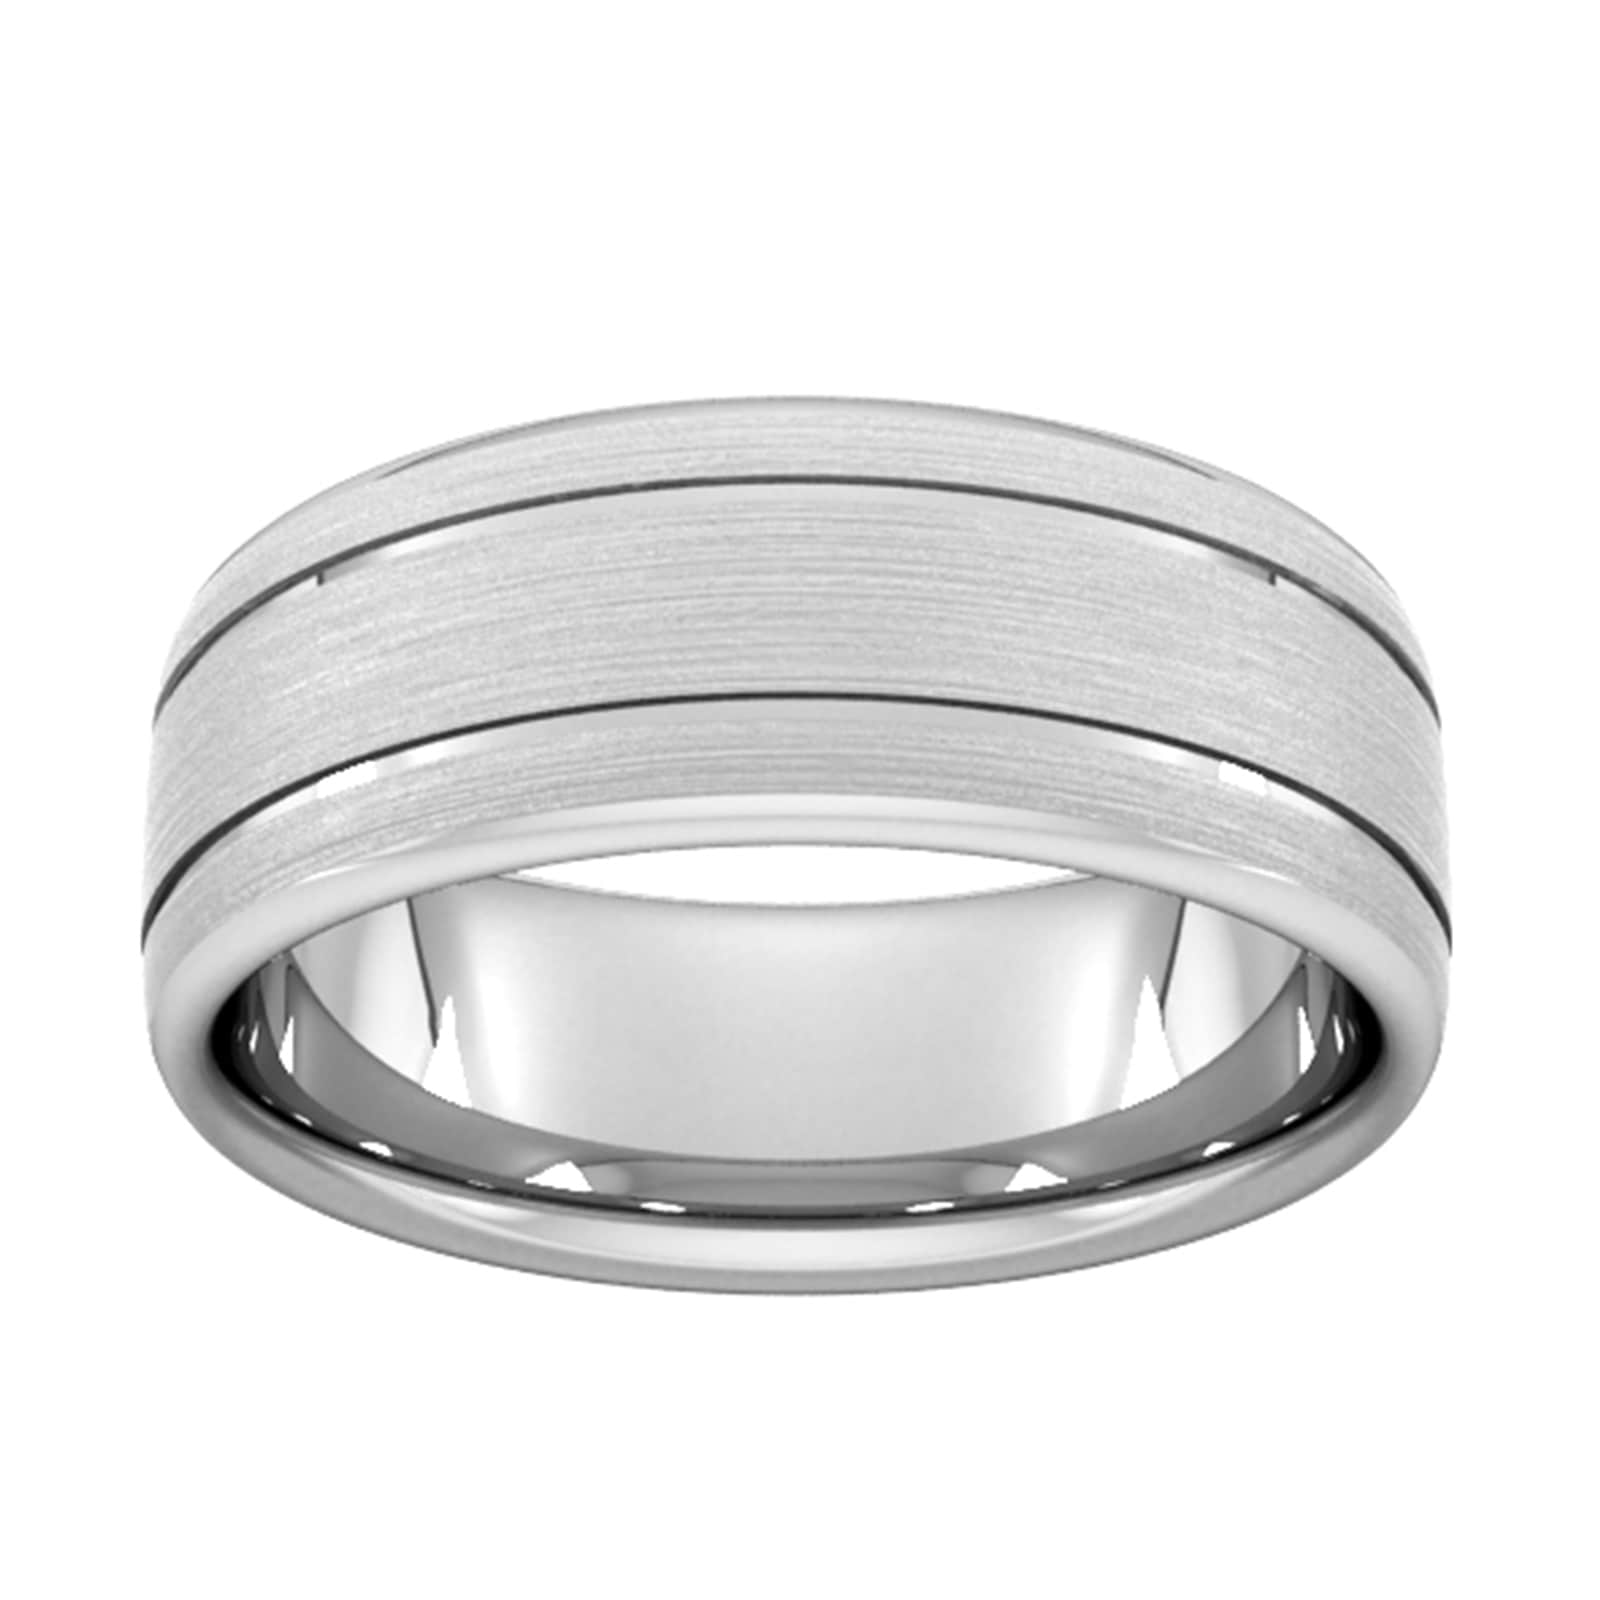 8mm D Shape Standard Matt Finish With Double Grooves Wedding Ring In 9 Carat White Gold - Ring Size S